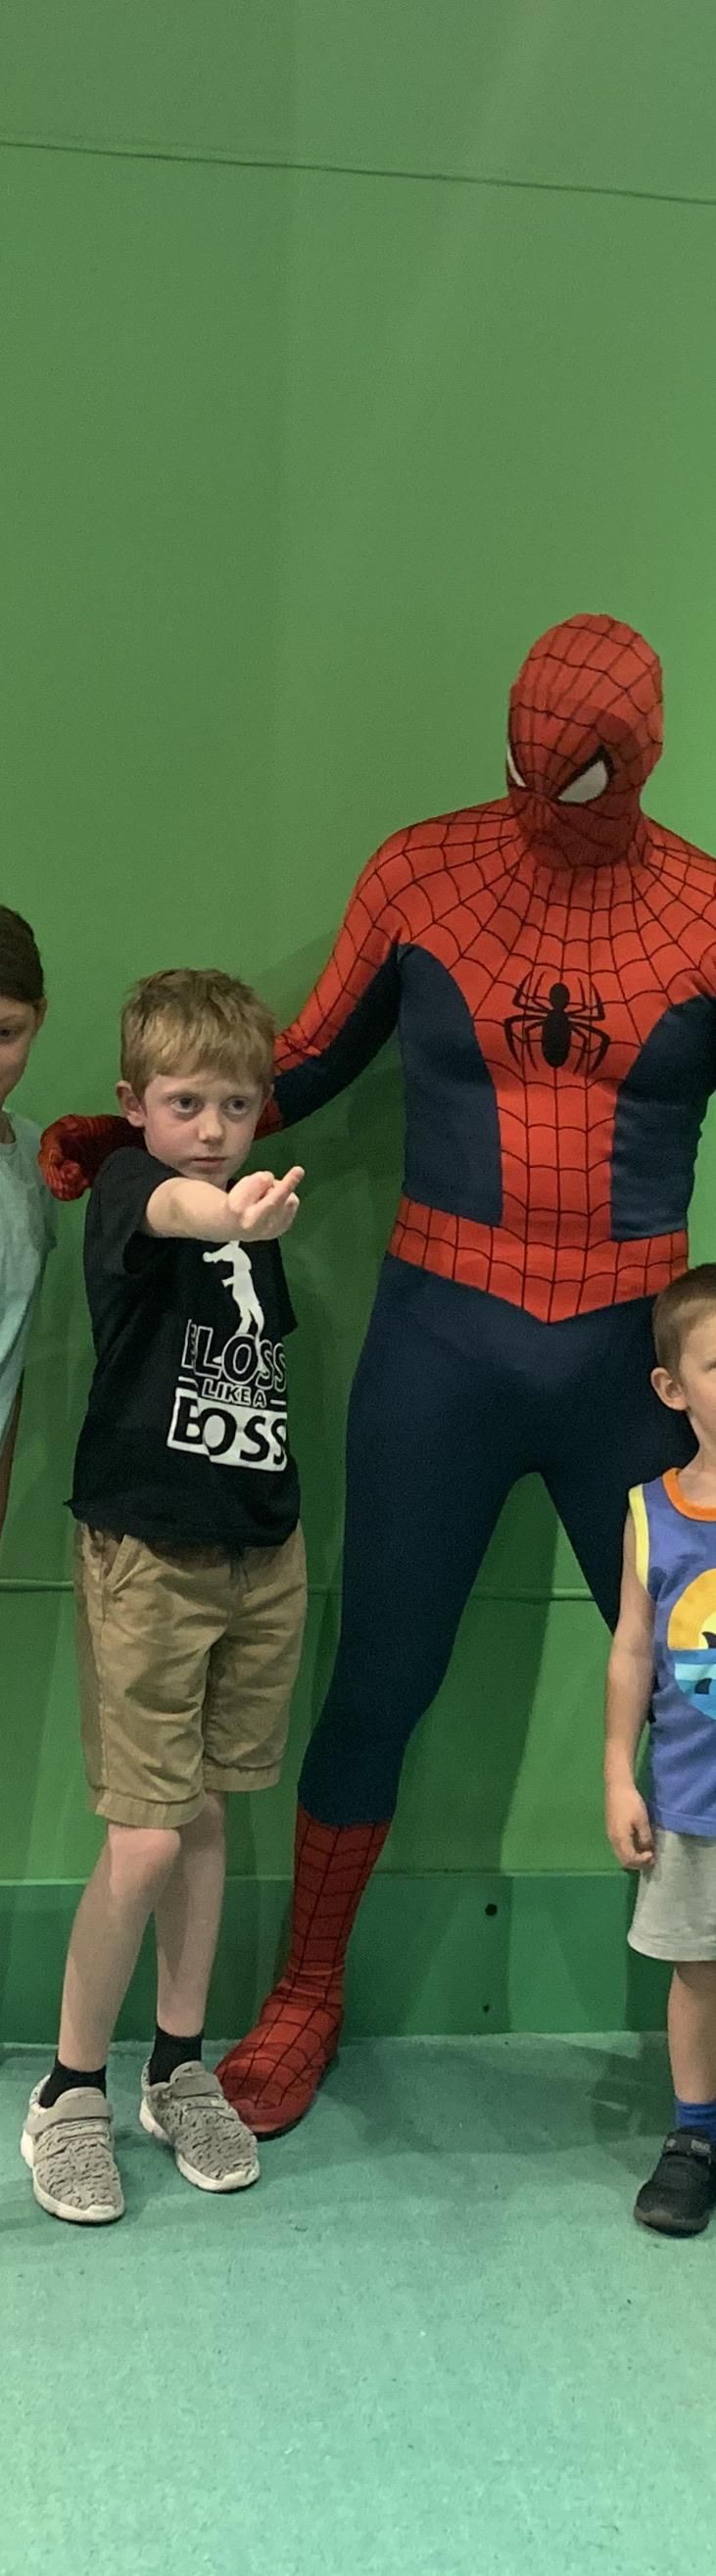 My son was trying to make a “web shooting” hand. I’m proud and ashamed.